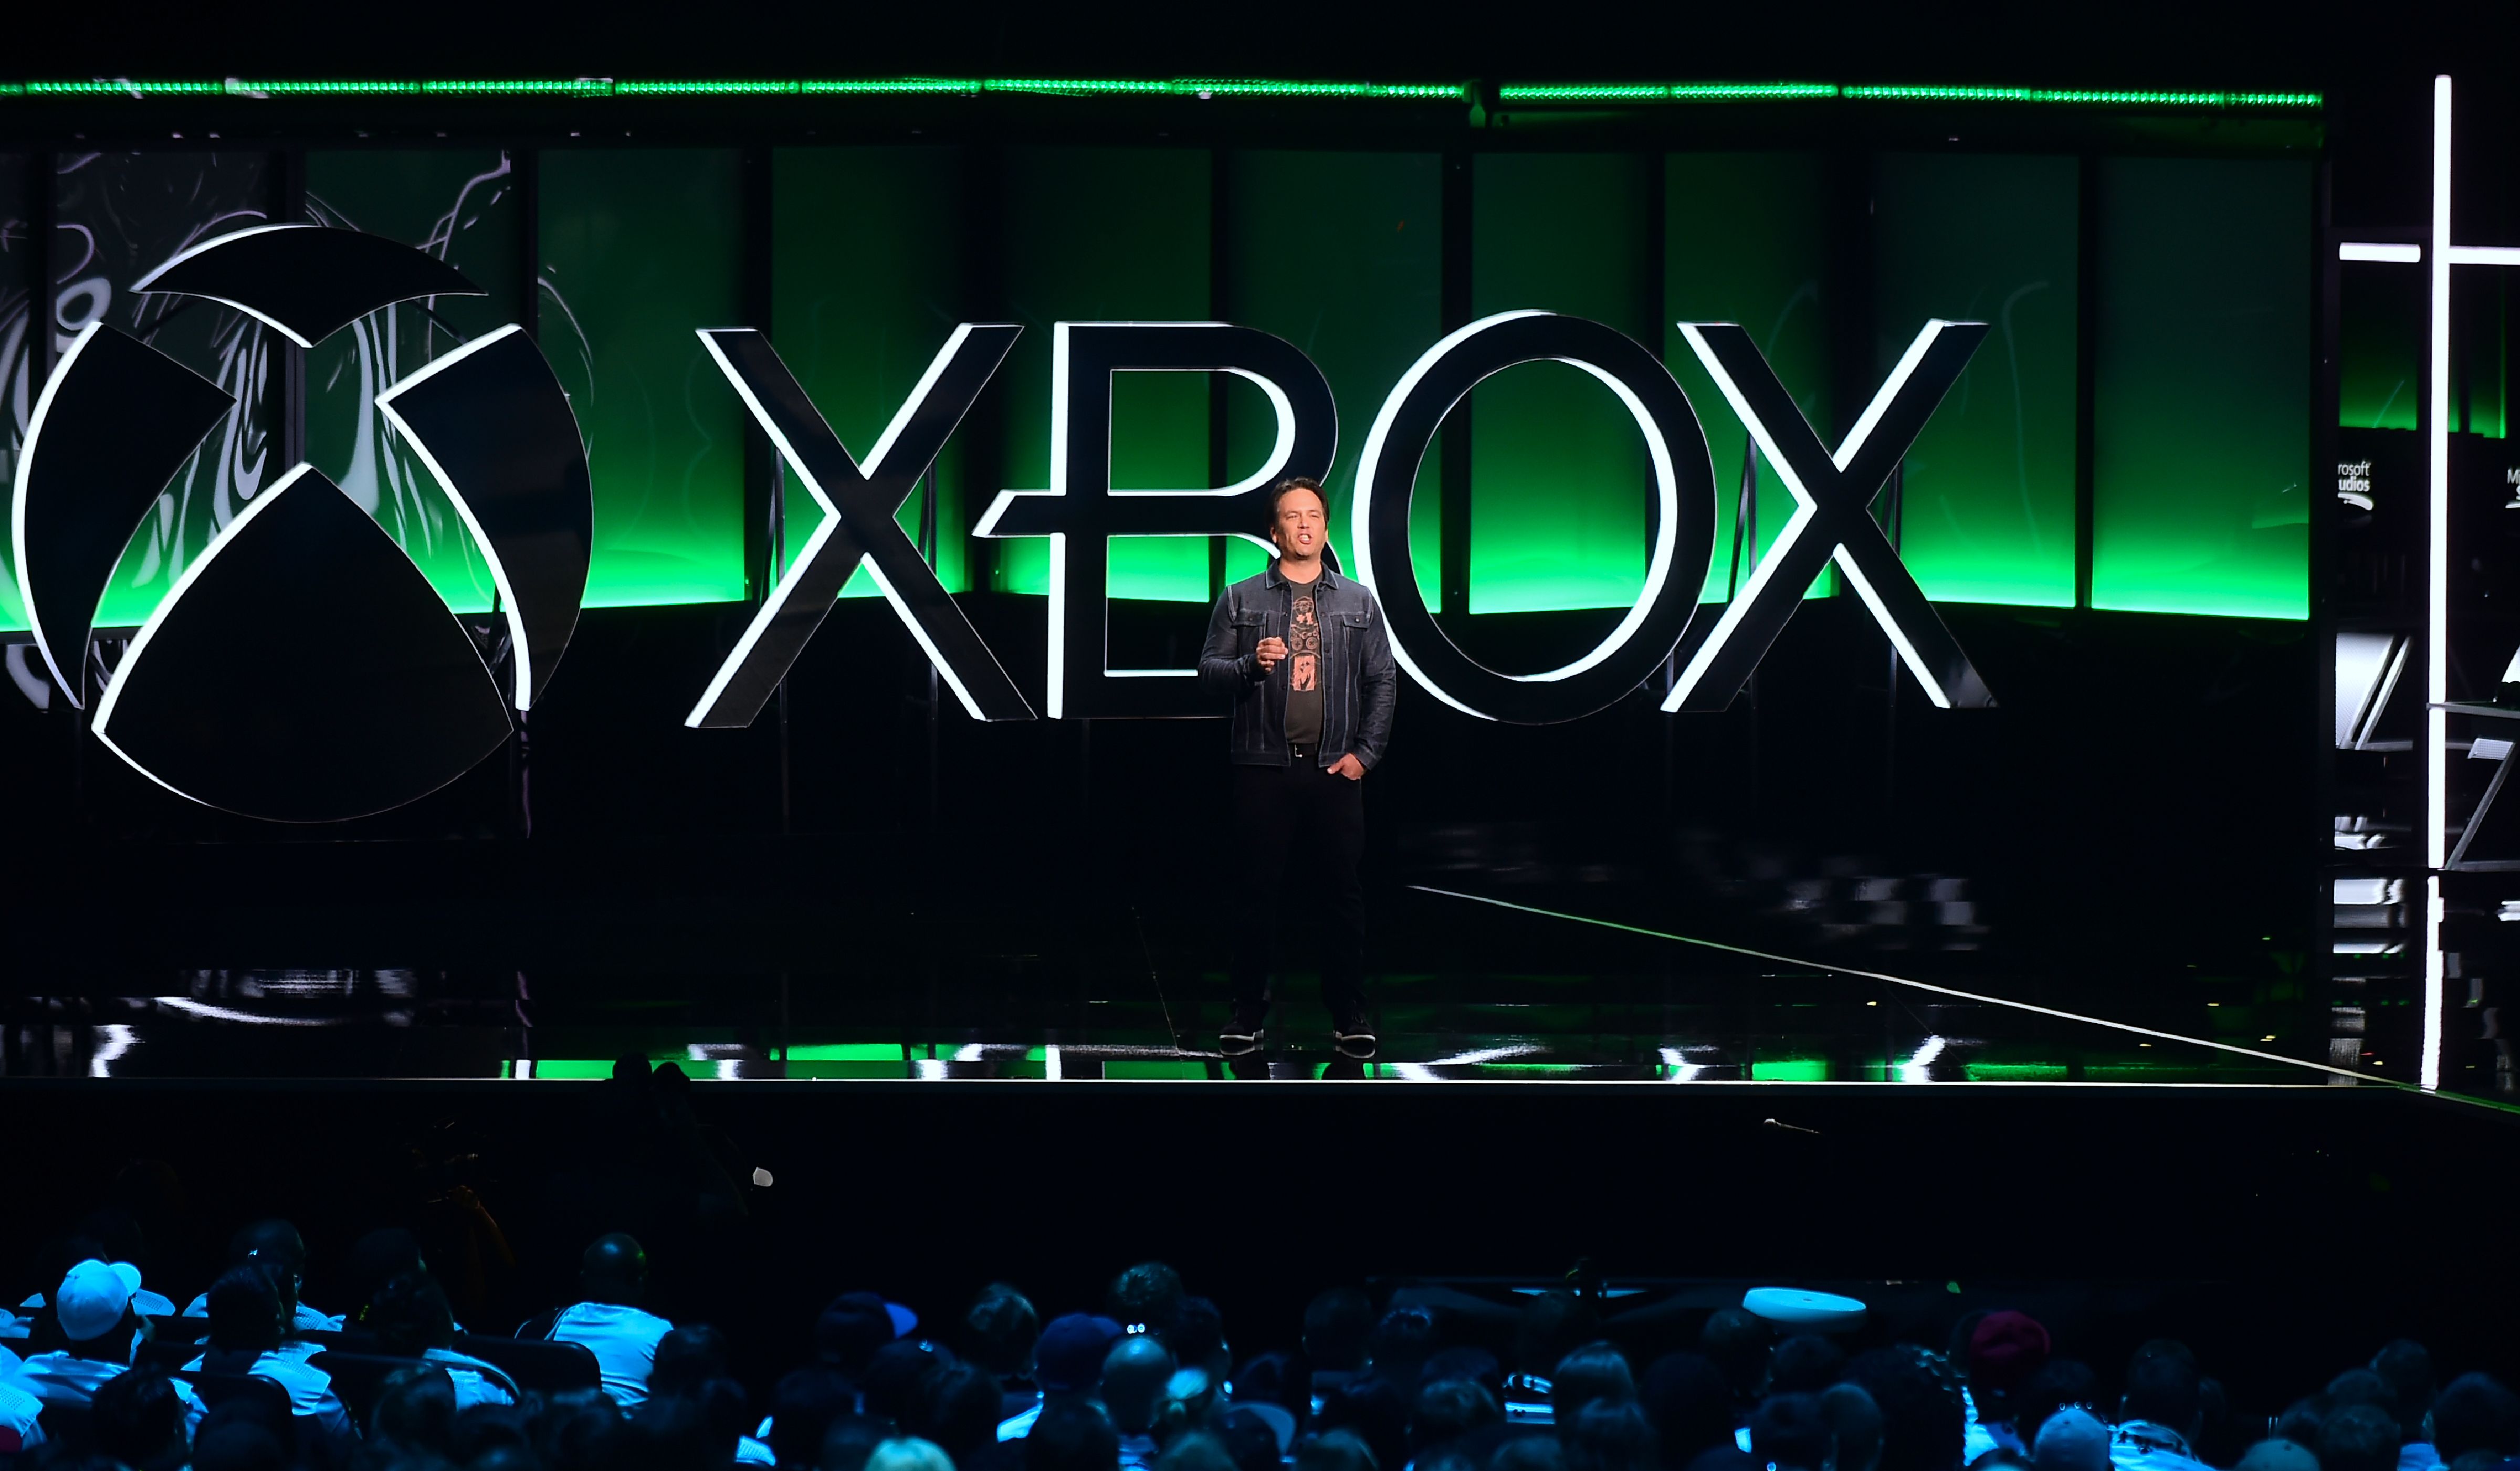 Phil Spencer, Executive President of Gaming at Microsoft, addresses the audience at the Xbox 2018 E3 briefing in Los Angeles, California on June 10, 2018,